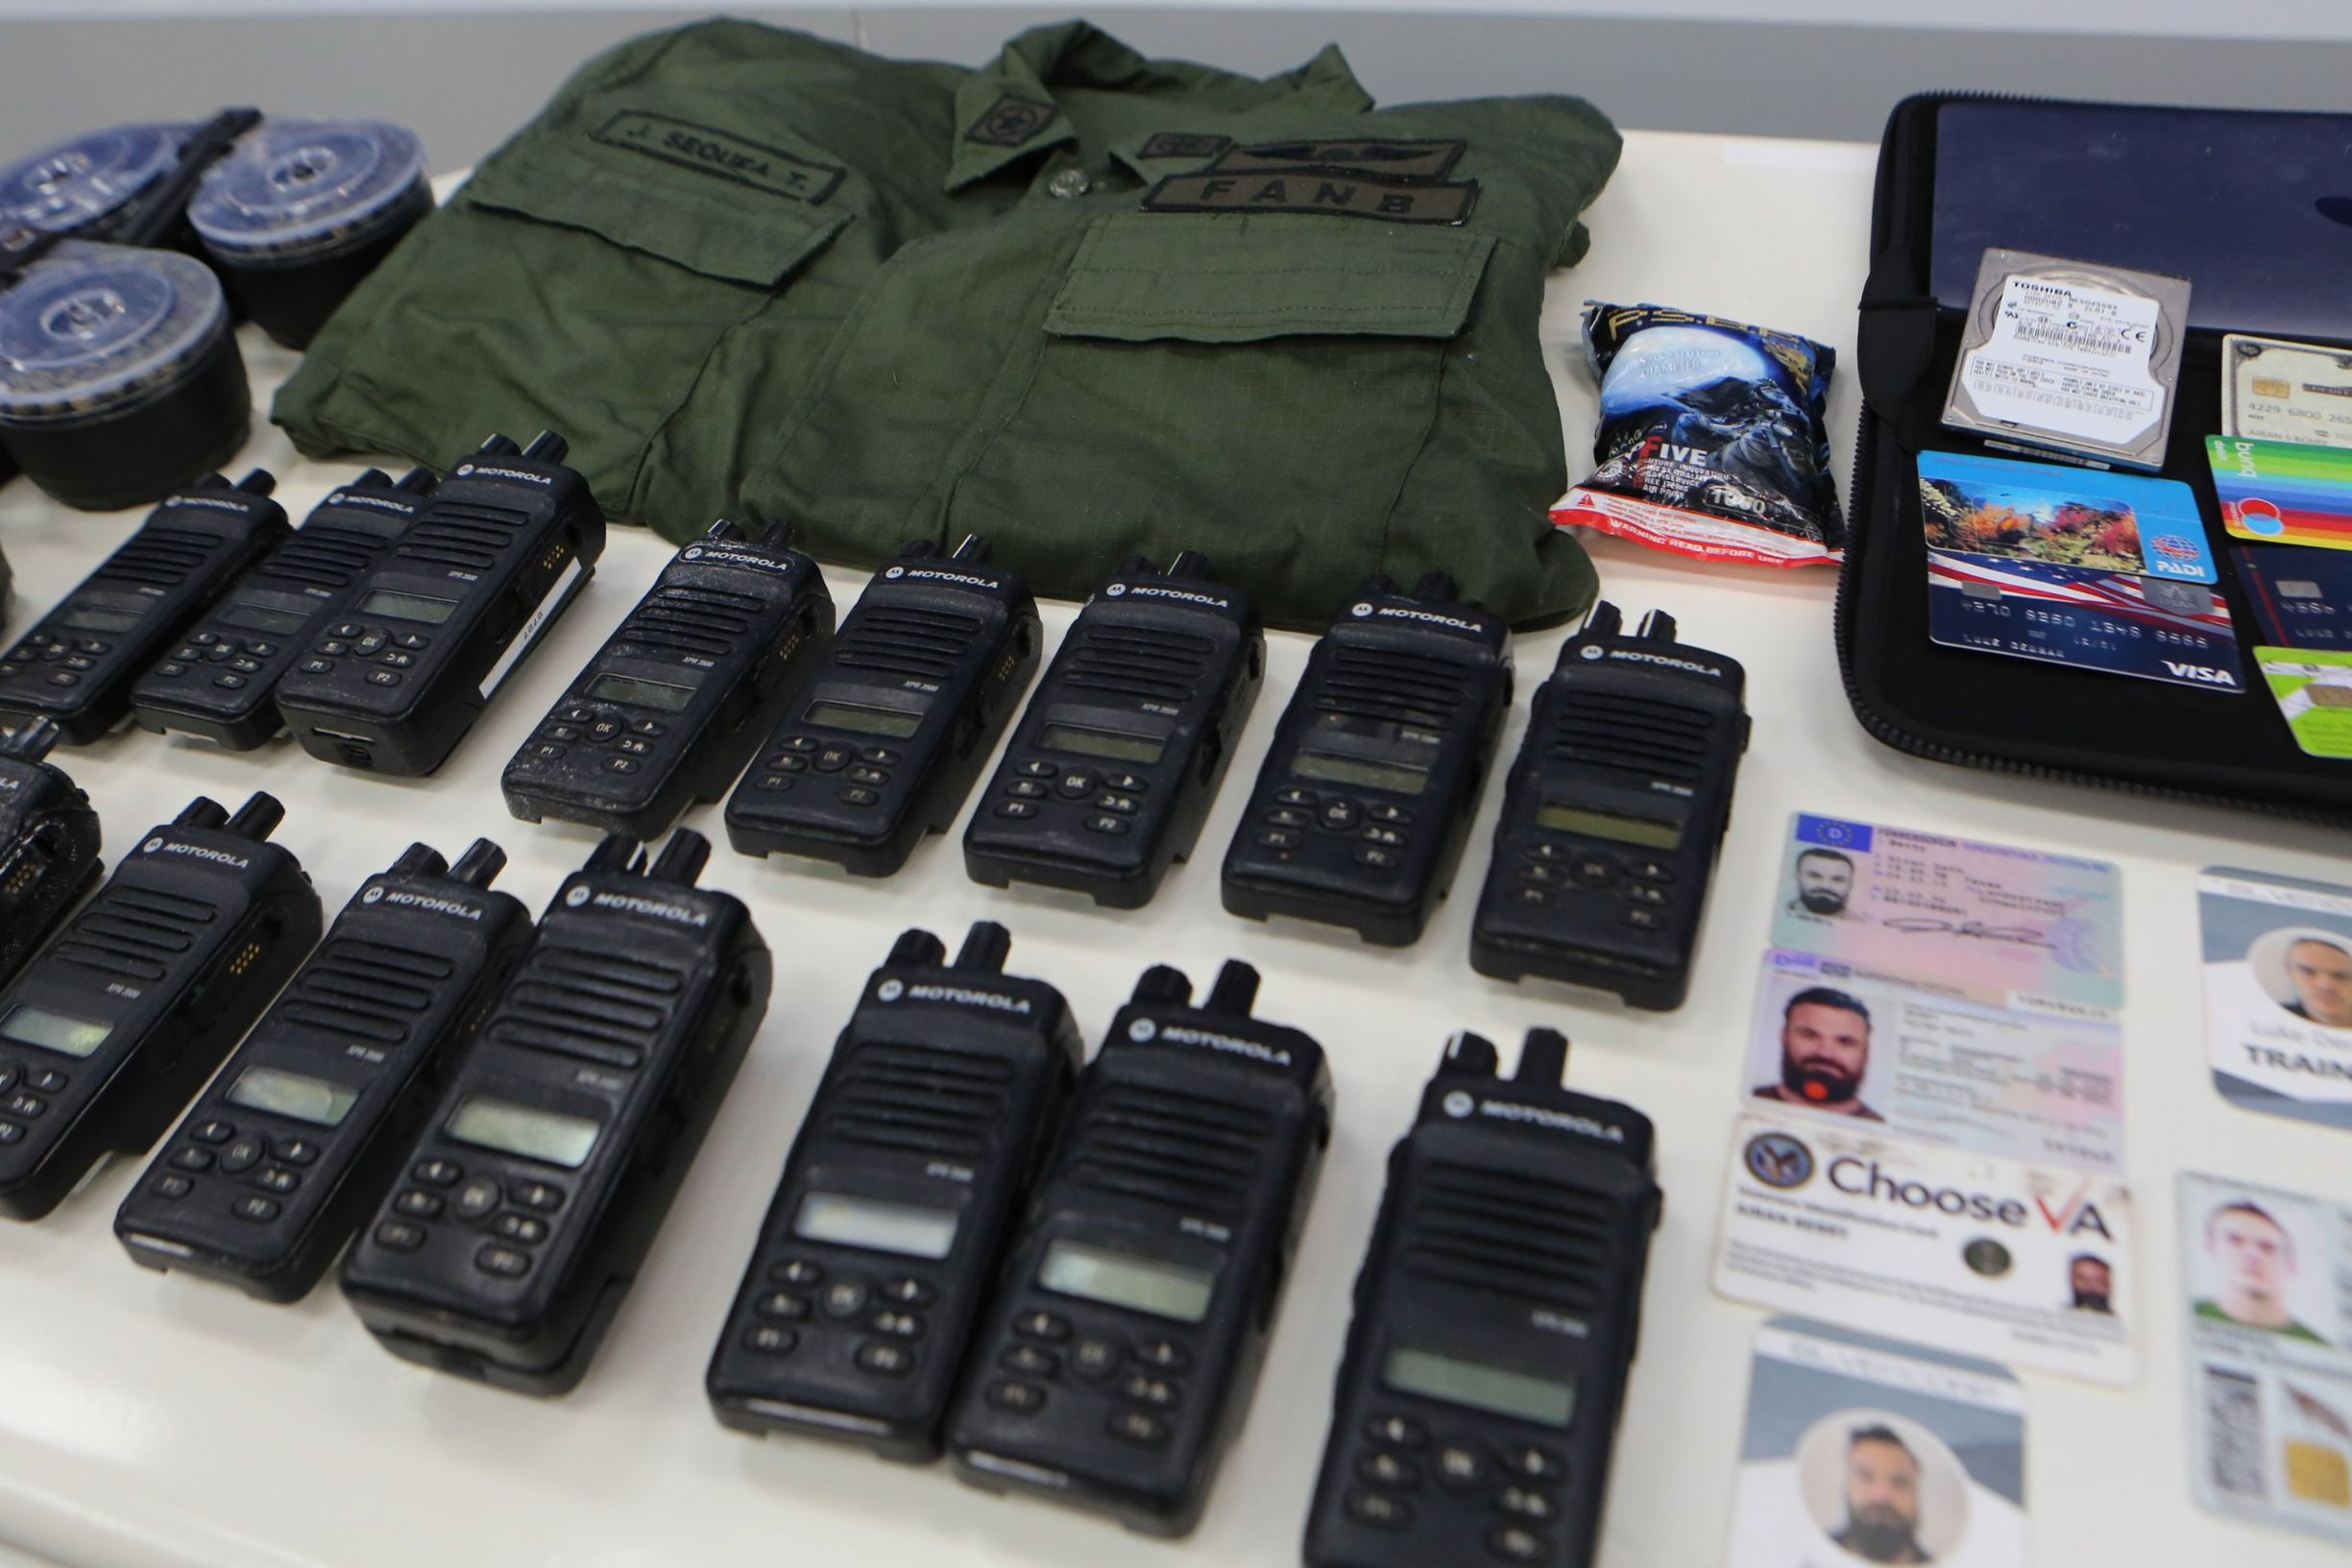 Handout picture released by the Venezuelan Presidency showing identification cards, two-way radios and other military gear allegedly seized to US citizens arrested by security forces during a meeting with members of the Bolivarian National Armed Forces (FANB), at Miraflores Presidential Palace in Caracas on May 4, 2020. - Venezuela is to try two Americans, identified as Luke Denman and Airan Berry, allegedly captured during a failed sea attack by mercenaries, President Nicolas Maduro said on May 6. (Photo by Marcelo Garcia / Venezuelan Presidency / AFP) / RESTRICTED TO EDITORIAL USE - MANDATORY CREDIT 